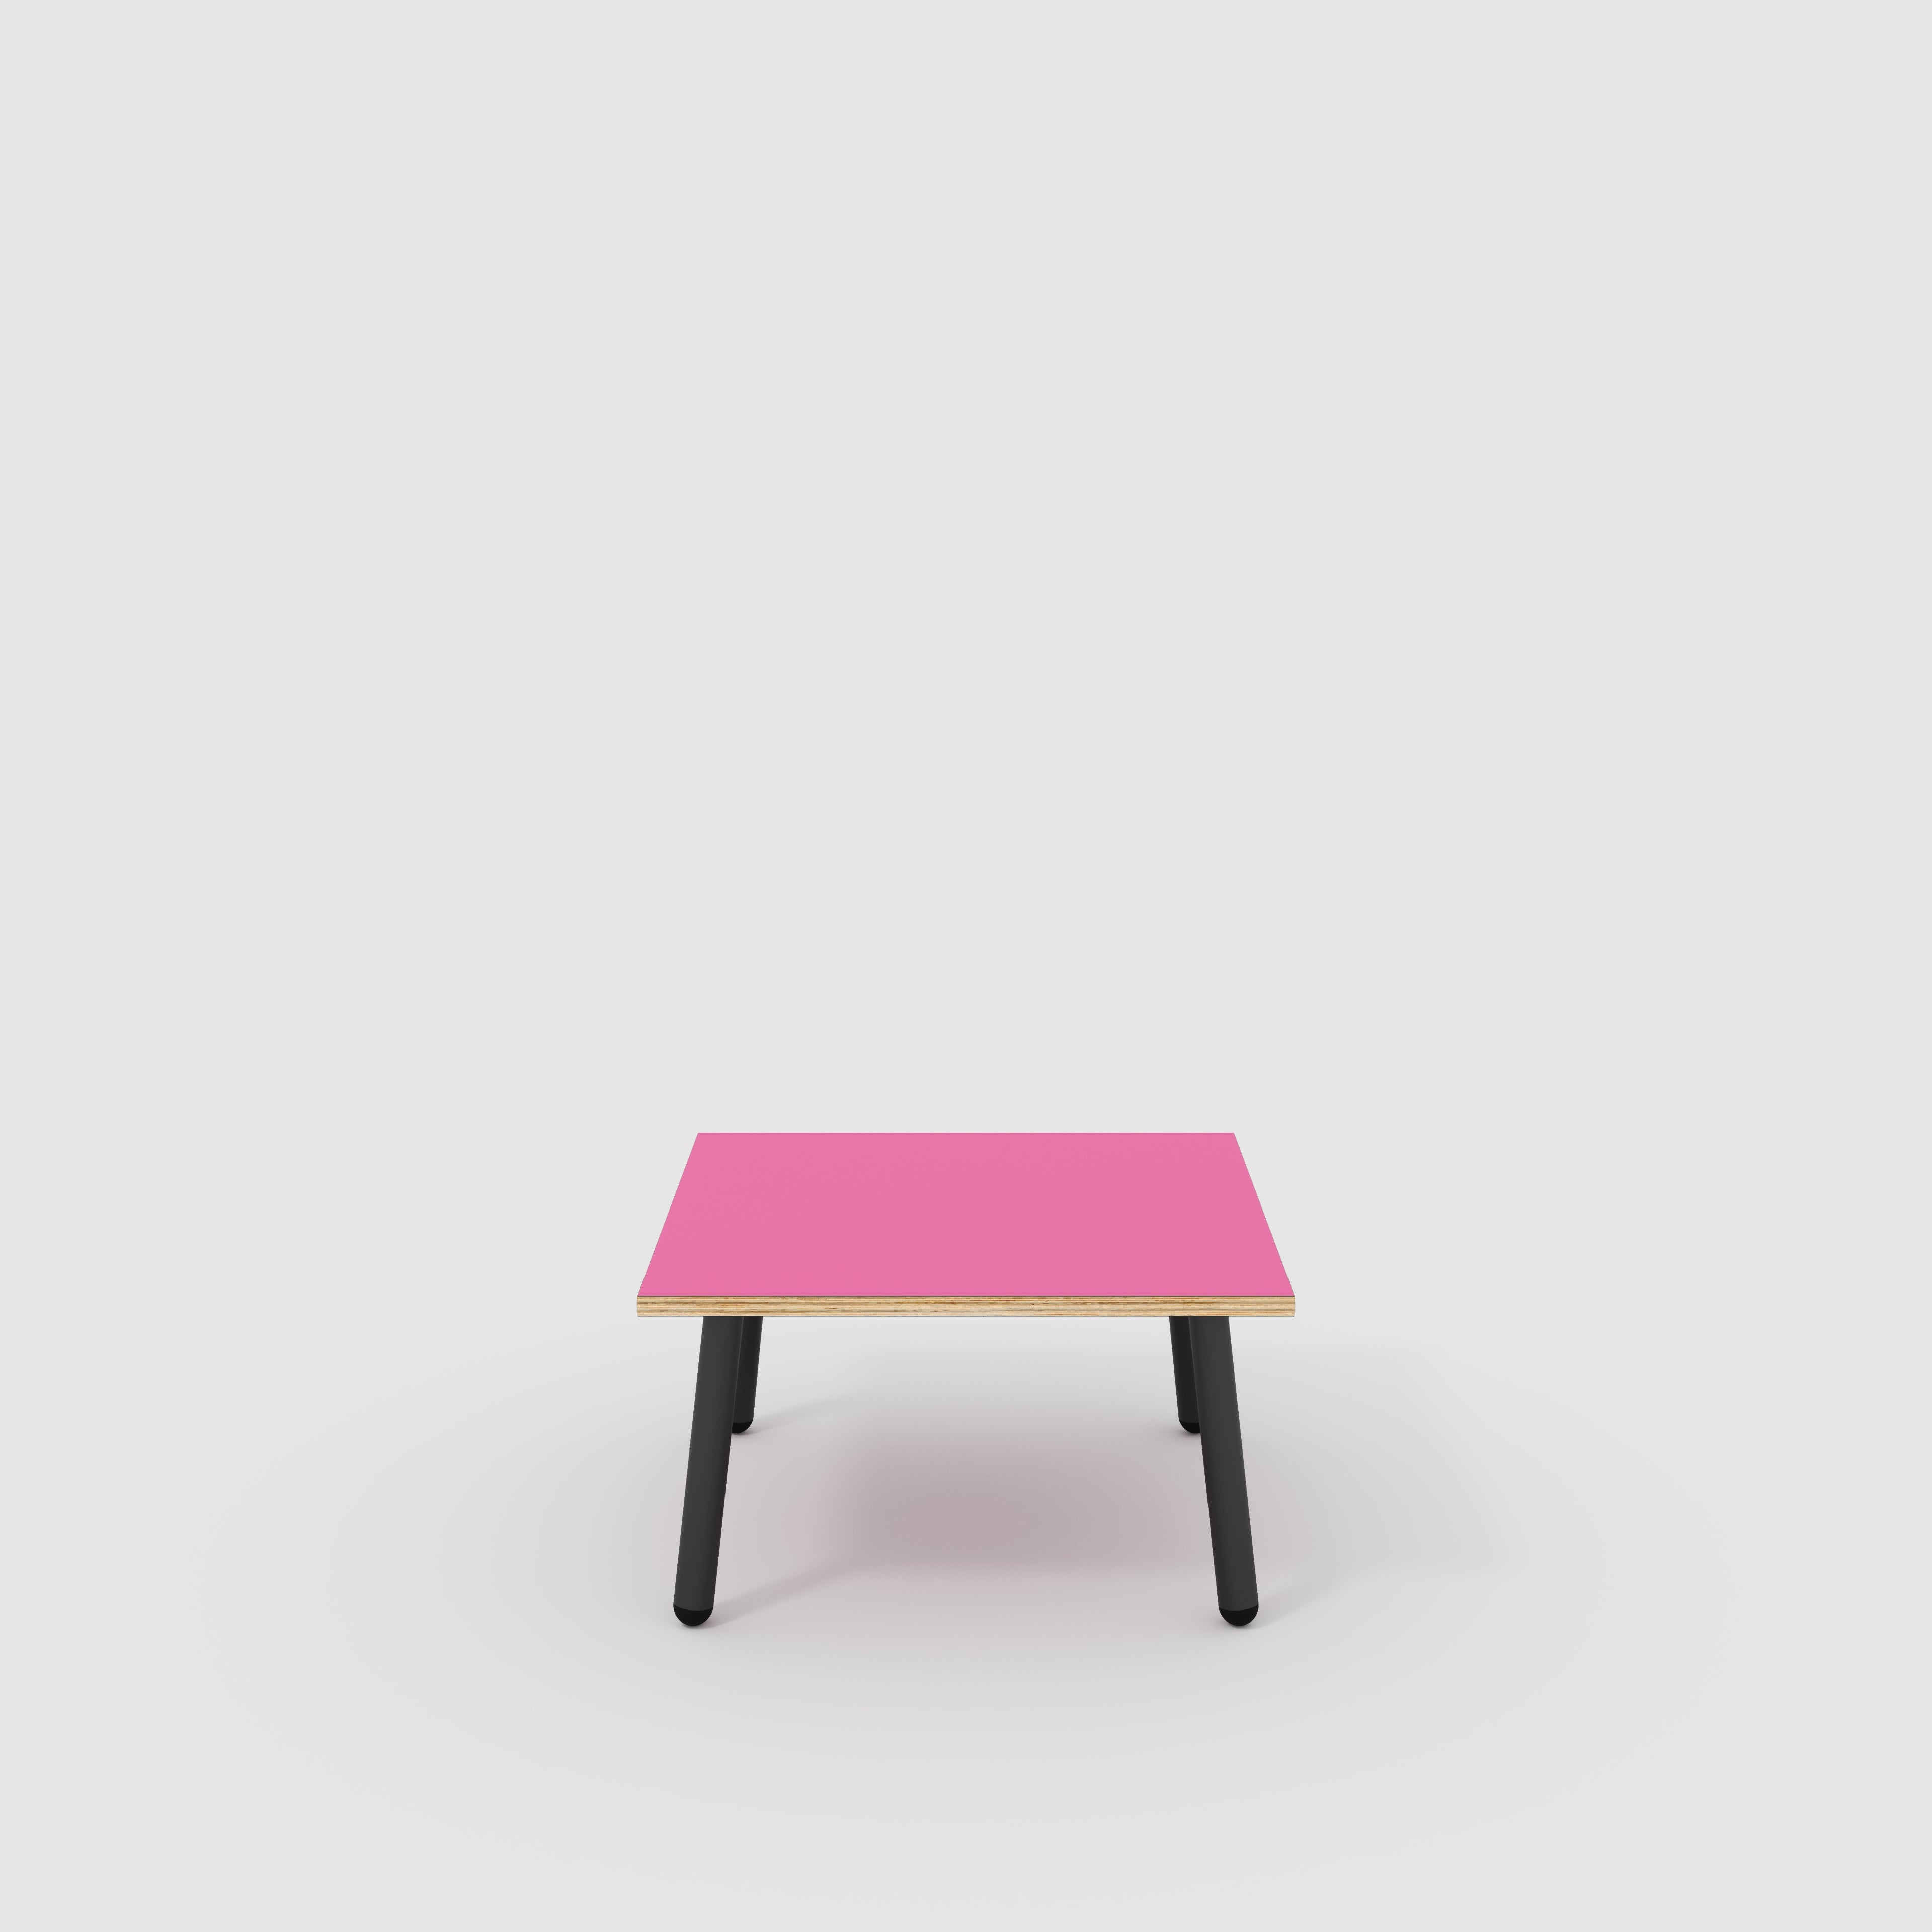 Coffee Table with Black Round Single Pin Legs - Formica Juicy Pink - 800(w) x 800(d) x 425(h)